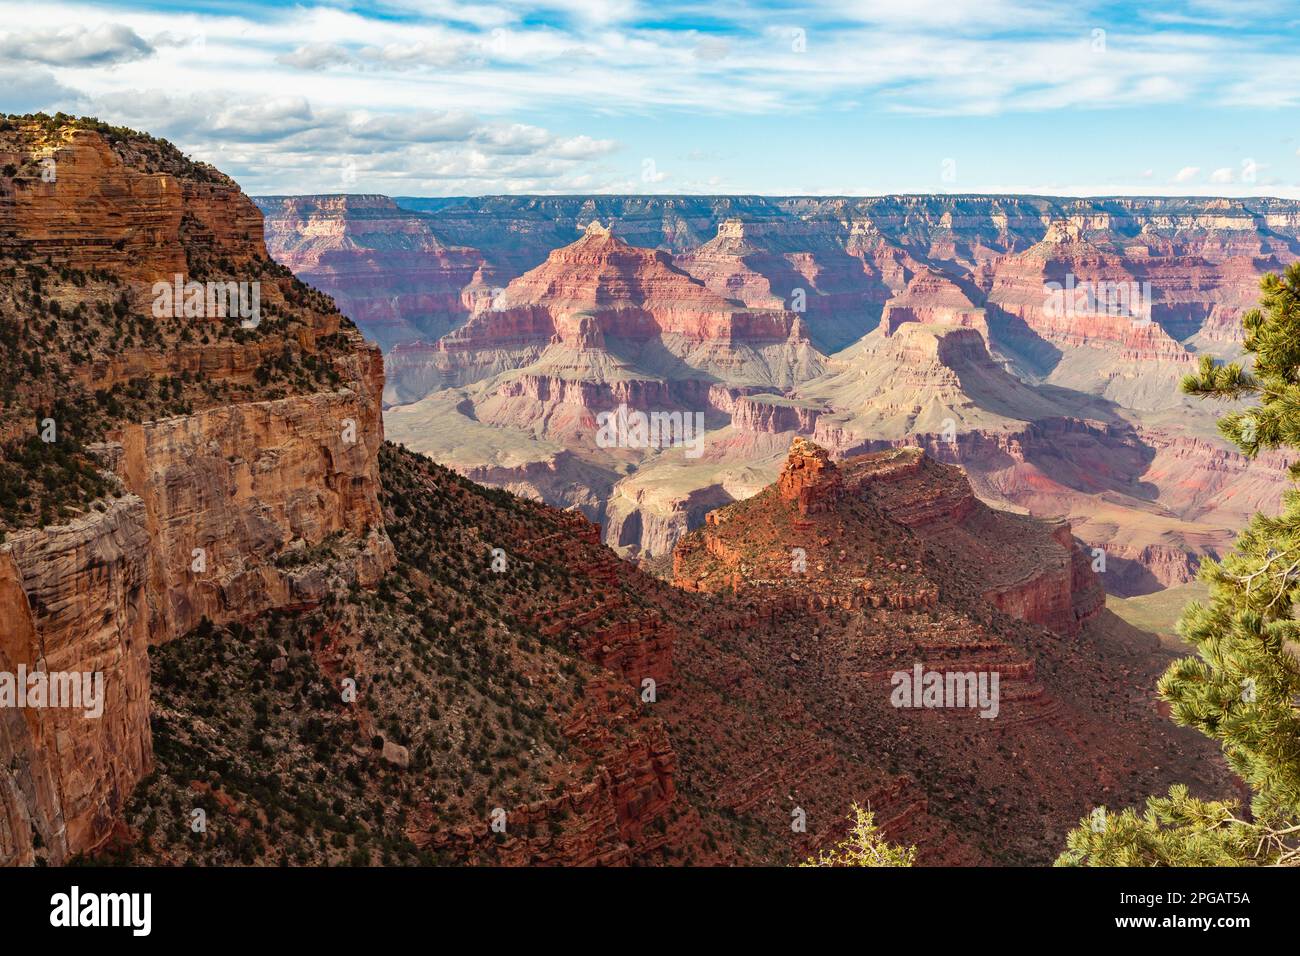 Grand Canyon aerial, Arizona. Panorama in beautiful nature landscape scenery at sunset in Grand Canyon National Park. South Rim of the Grand Canyon National Park. Scenery of the Grand Canyon, Arizona. Stock Photo